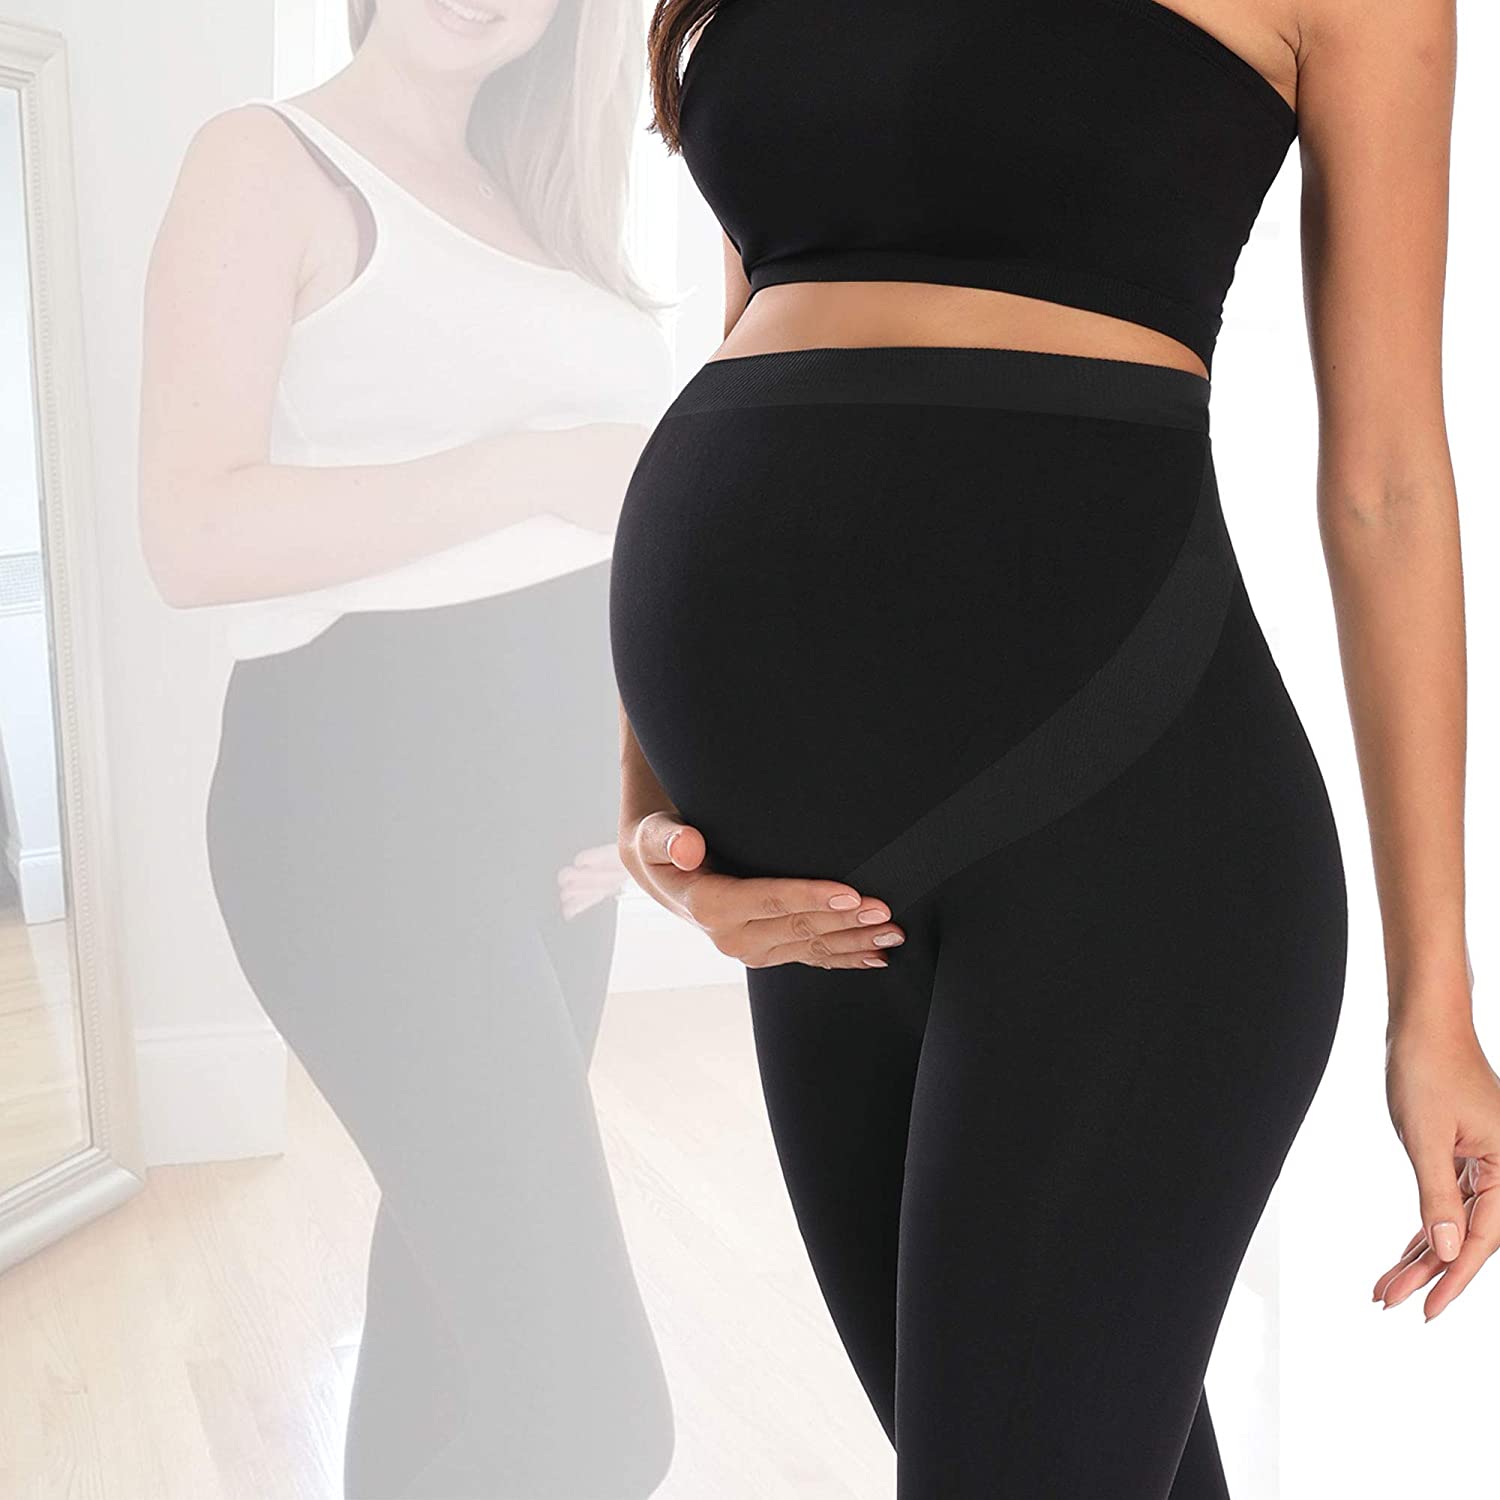 https://images.shoefabs.com/pp-4d5e33a7/l/9e629a7c940883/Seamless-Maternity-Leggings-with-Pants-Extenders-Over-the-Belly--Stretch-Comfy-Full-Length-Yoga-Pants-Black-9e629a7c940883.jpg